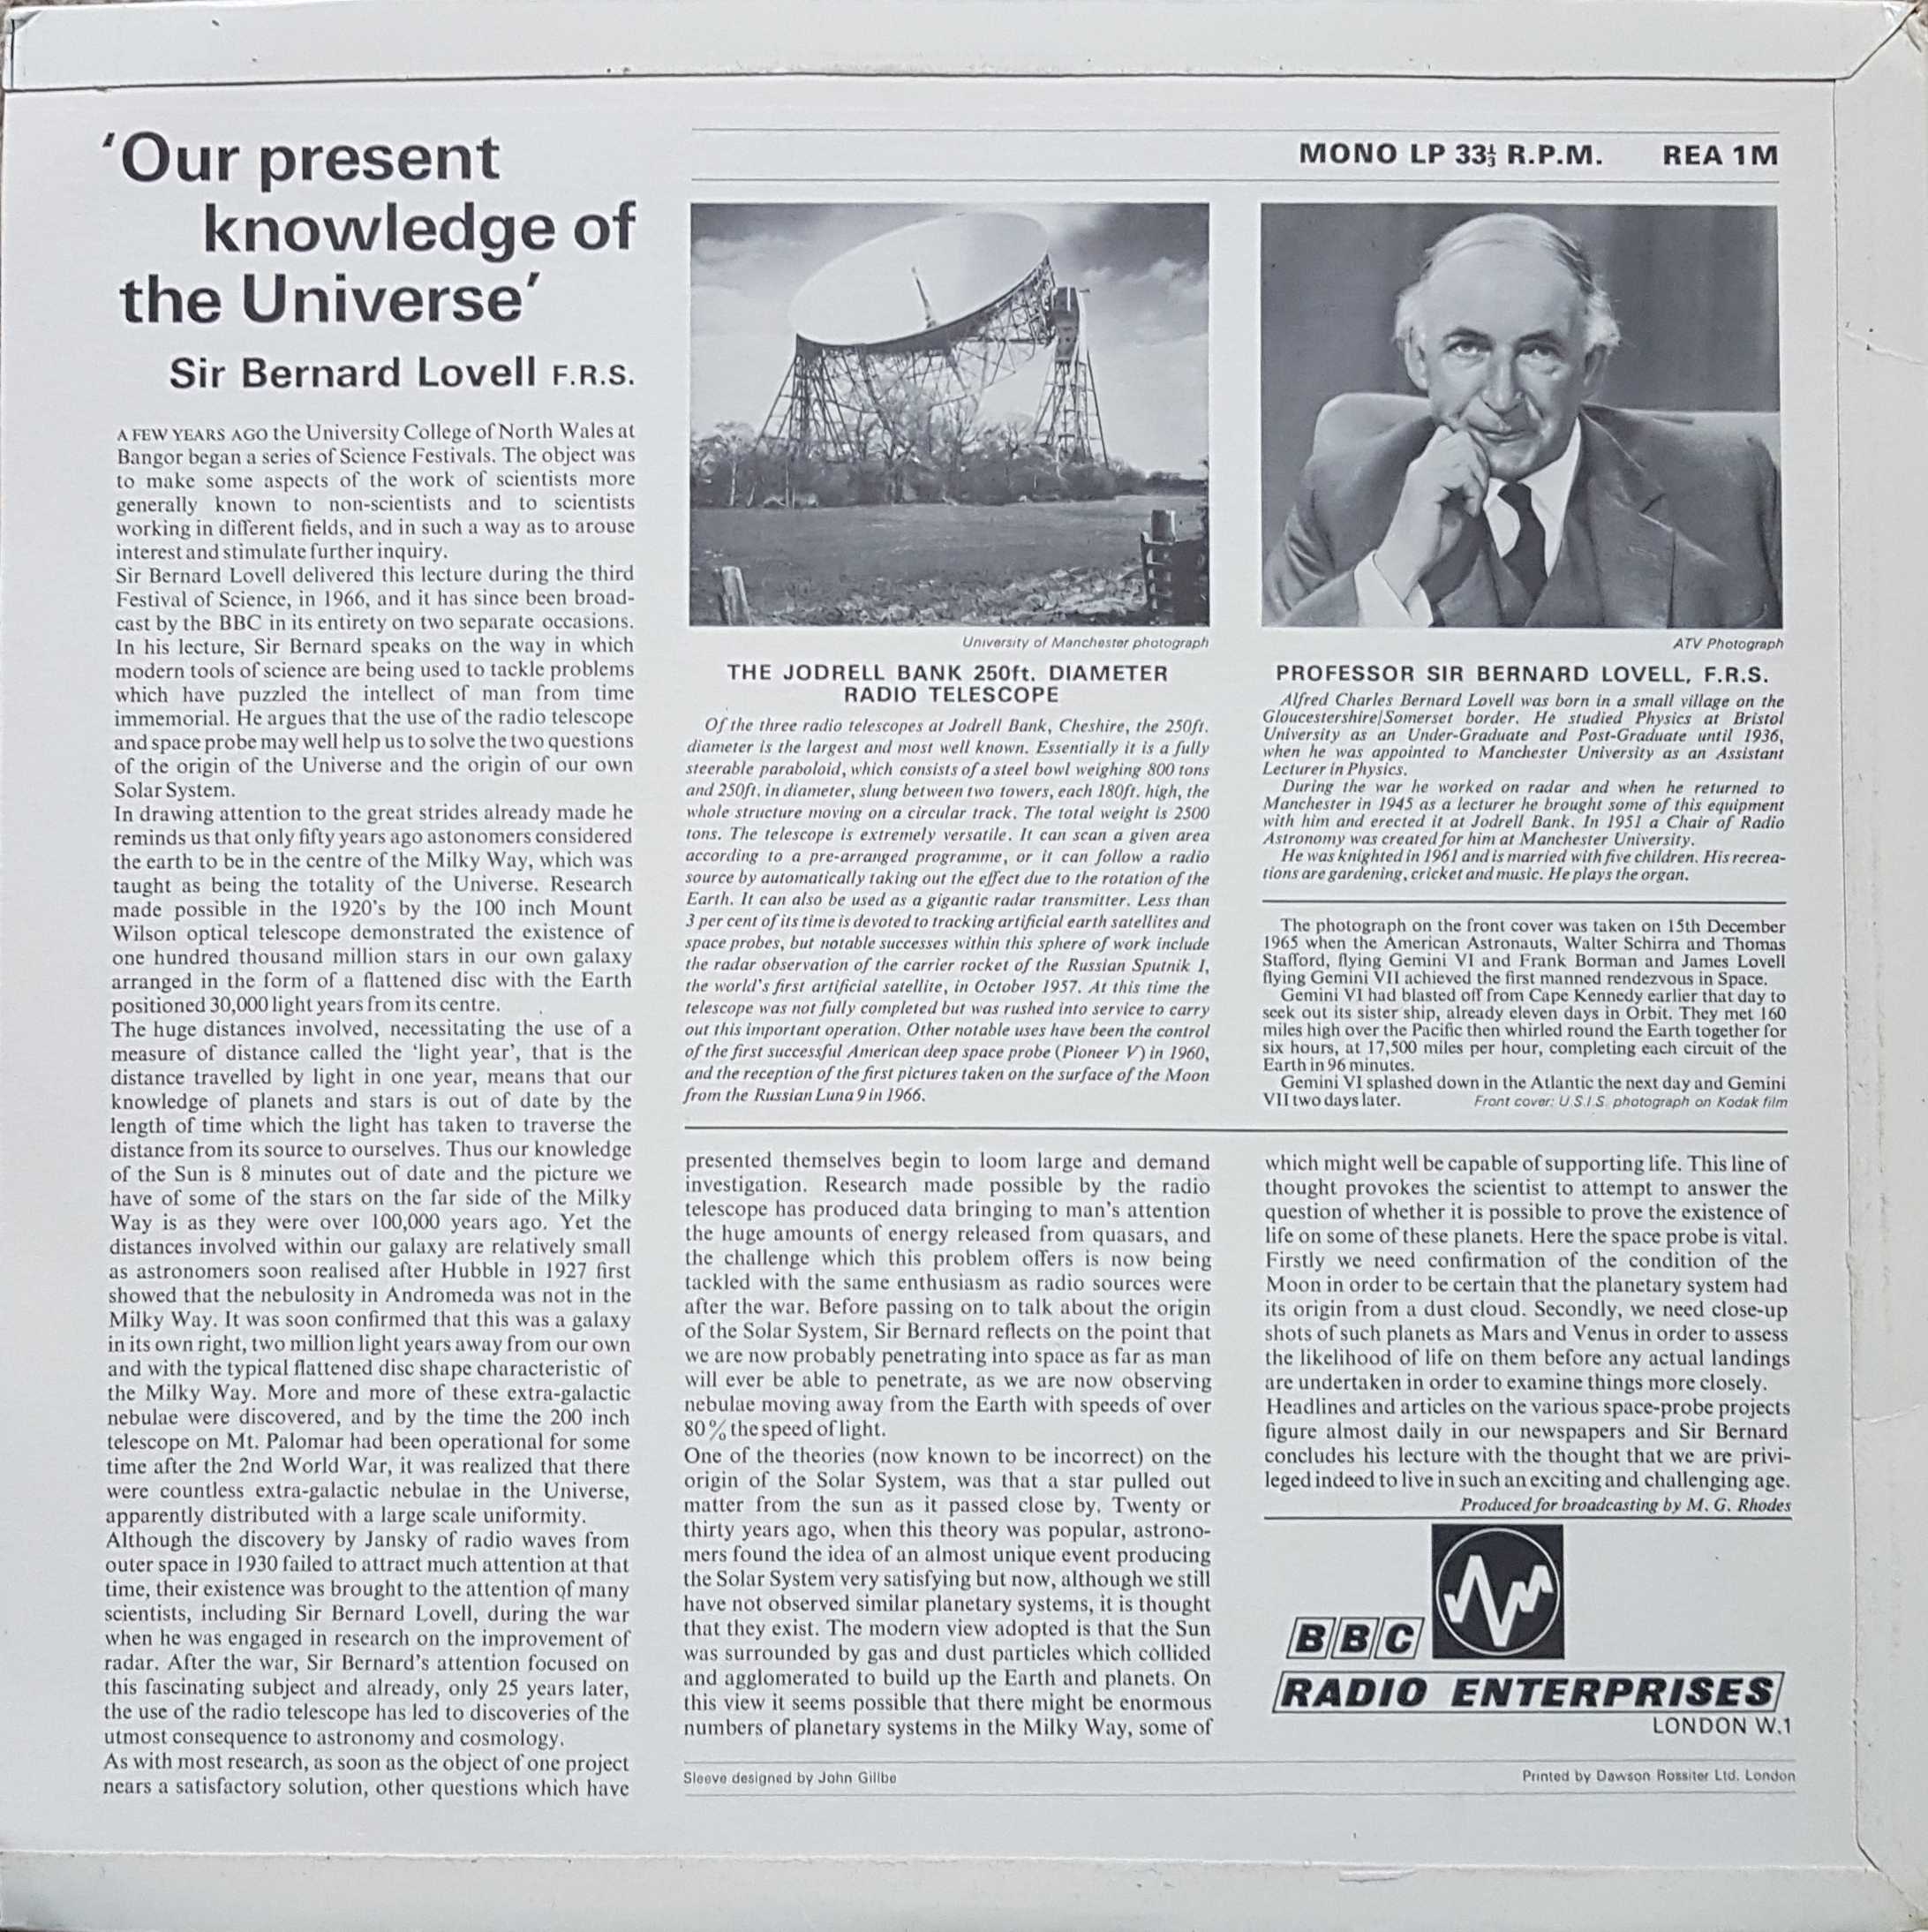 Picture of RE 2 Our present knowledge of the Universe by artist Sir Bernard Lovell from the BBC records and Tapes library